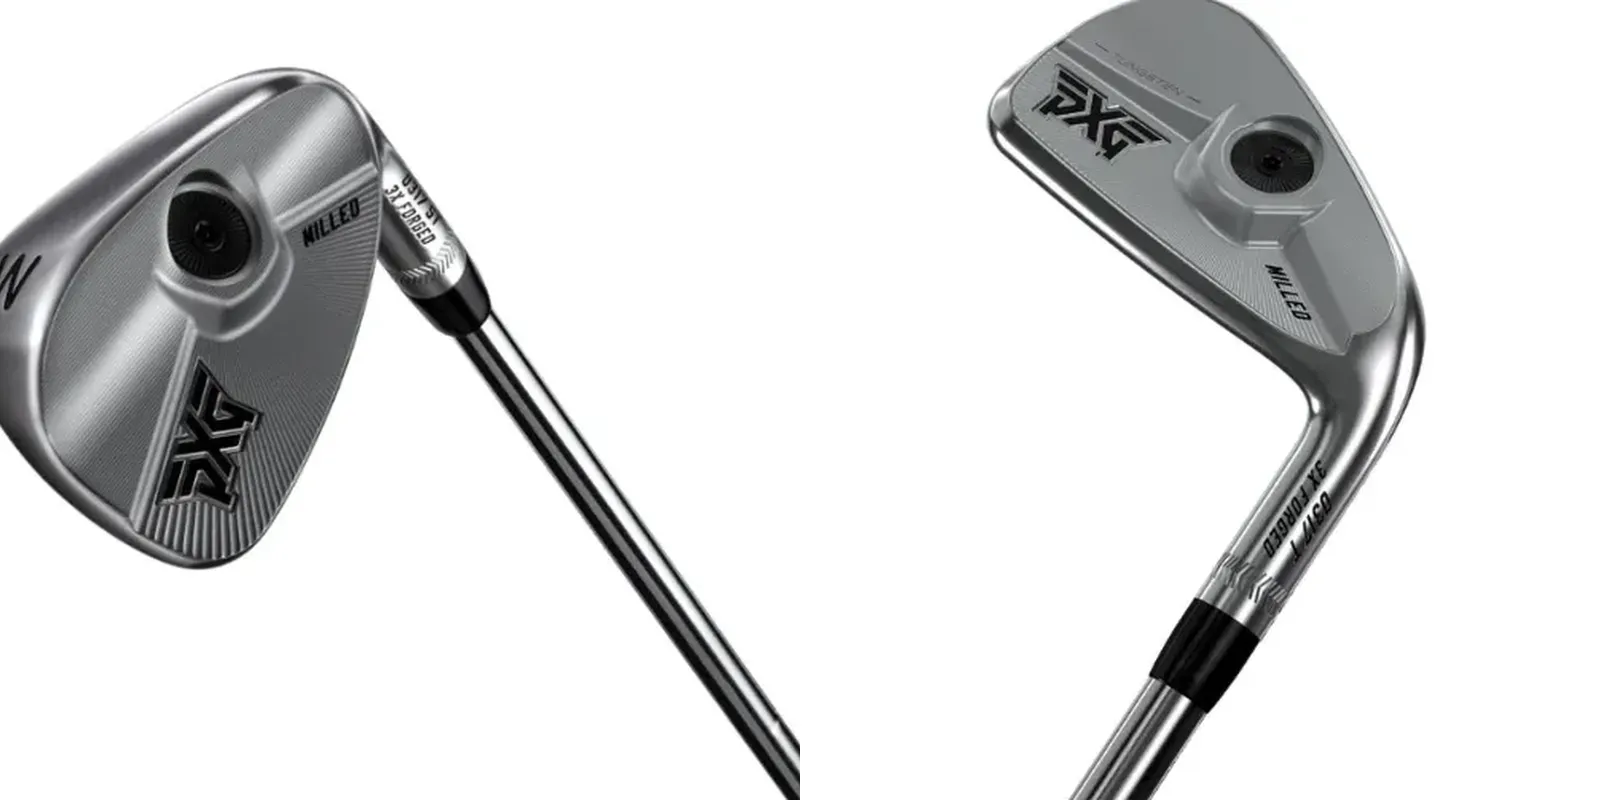 PXG 0317 ST Irons Vs 0317T Irons